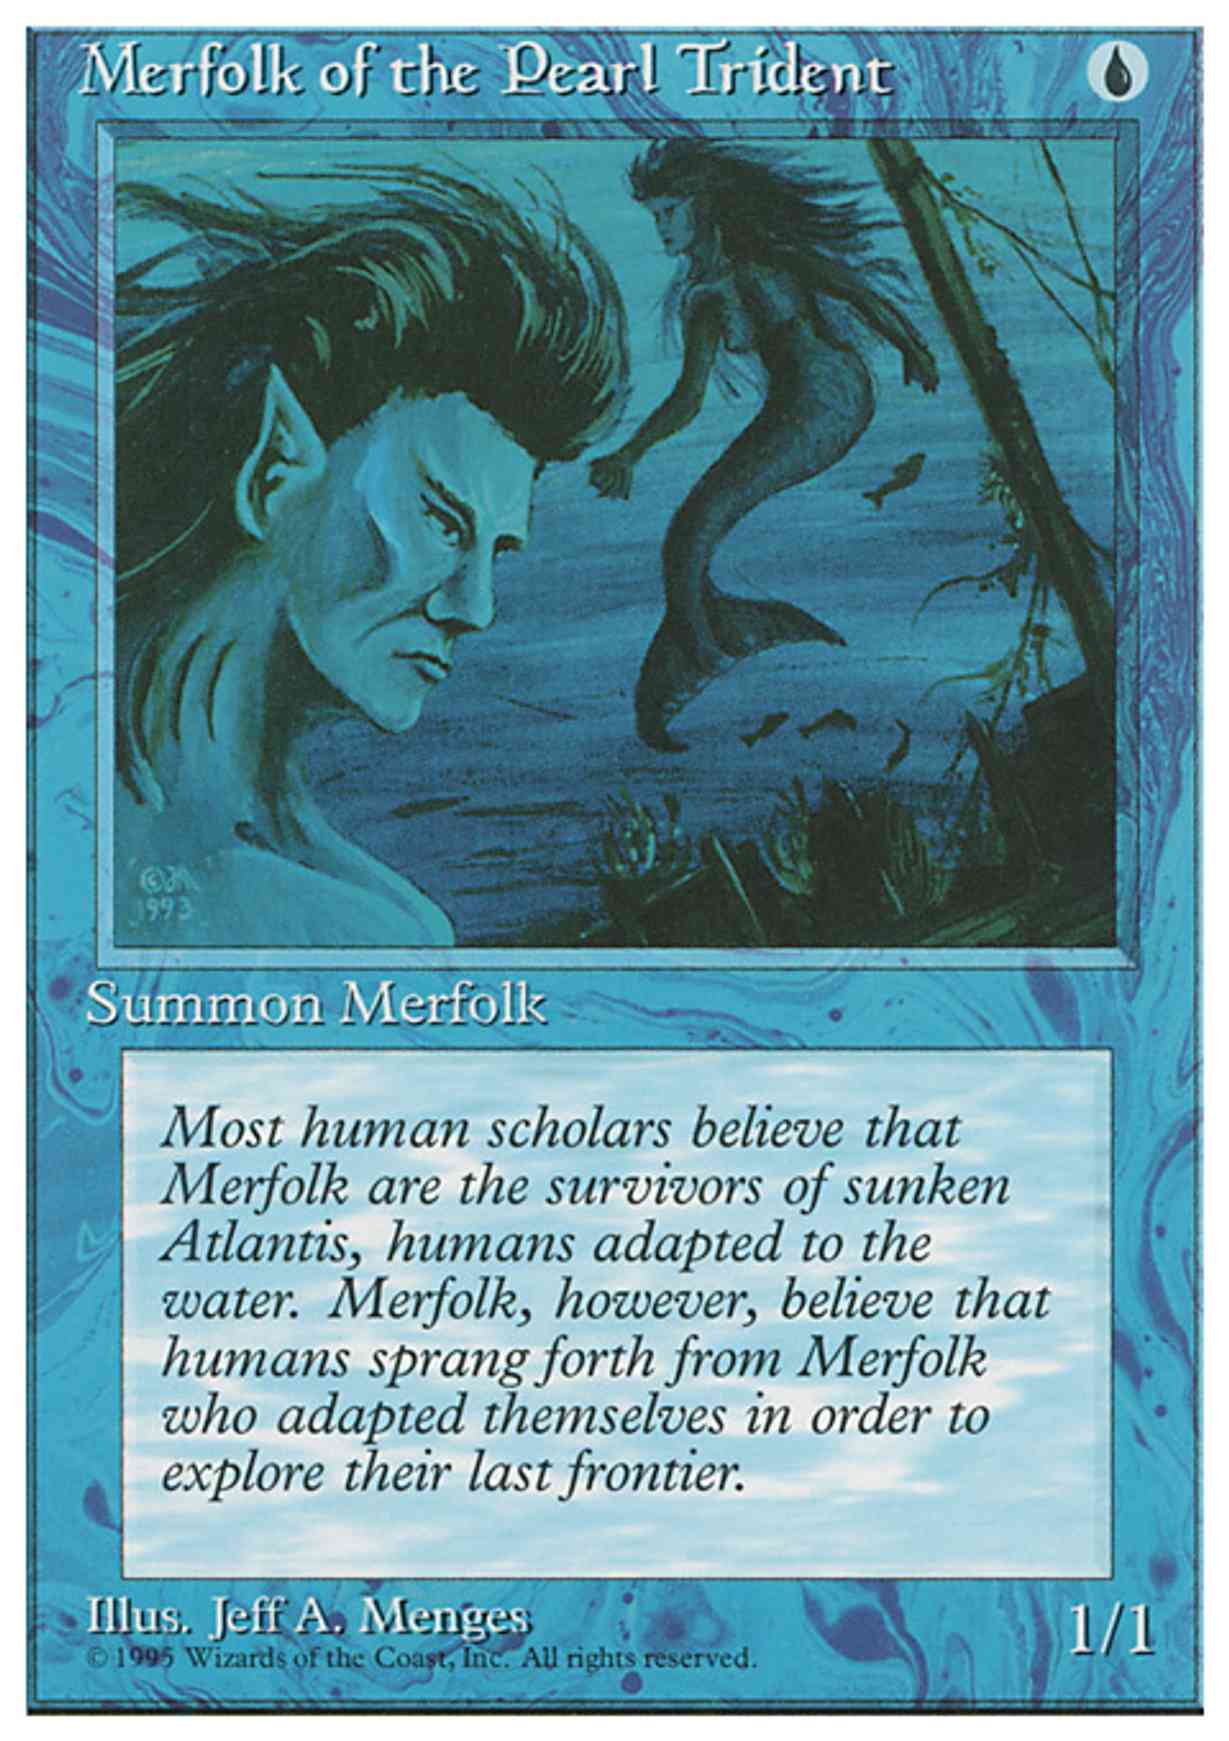 Merfolk of the Pearl Trident magic card front